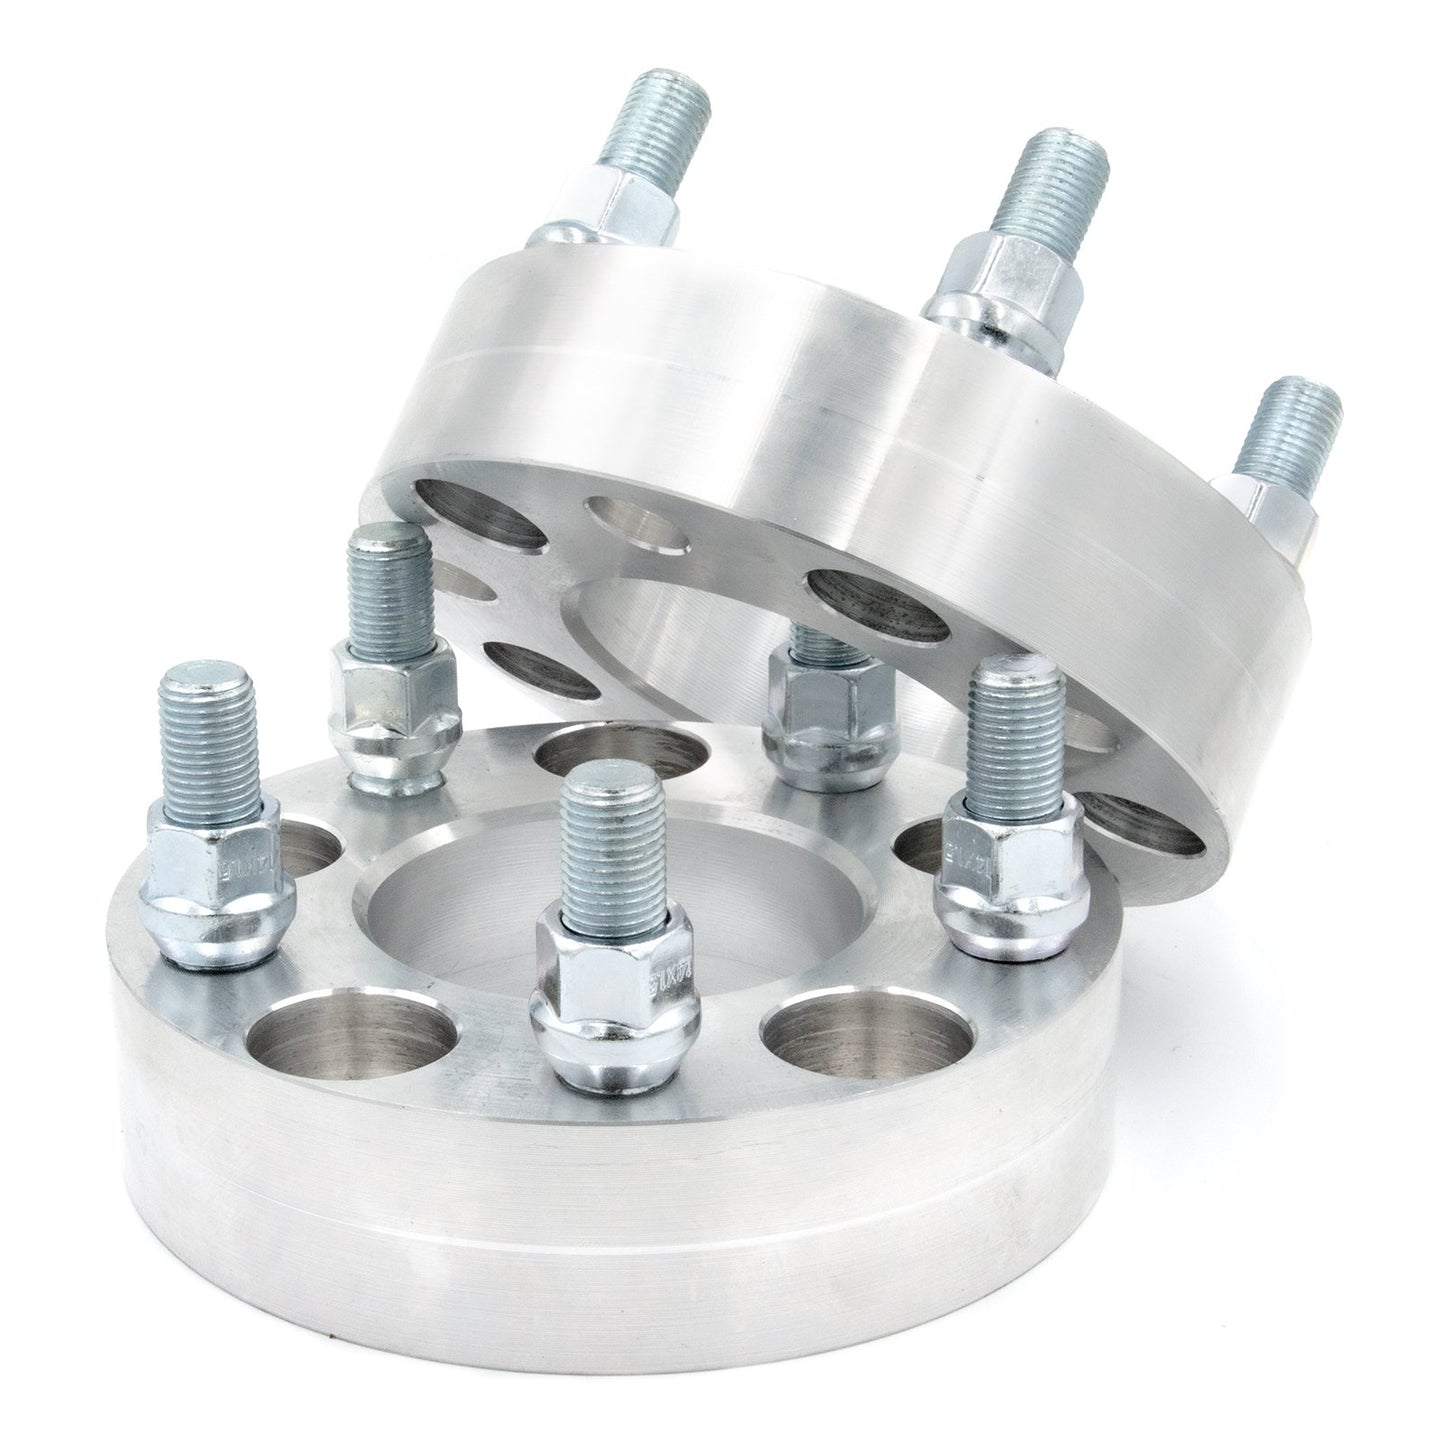 5x5" to 5x4.75" Wheel Spacer/Adapter - Thickness: 3/4"- 4"